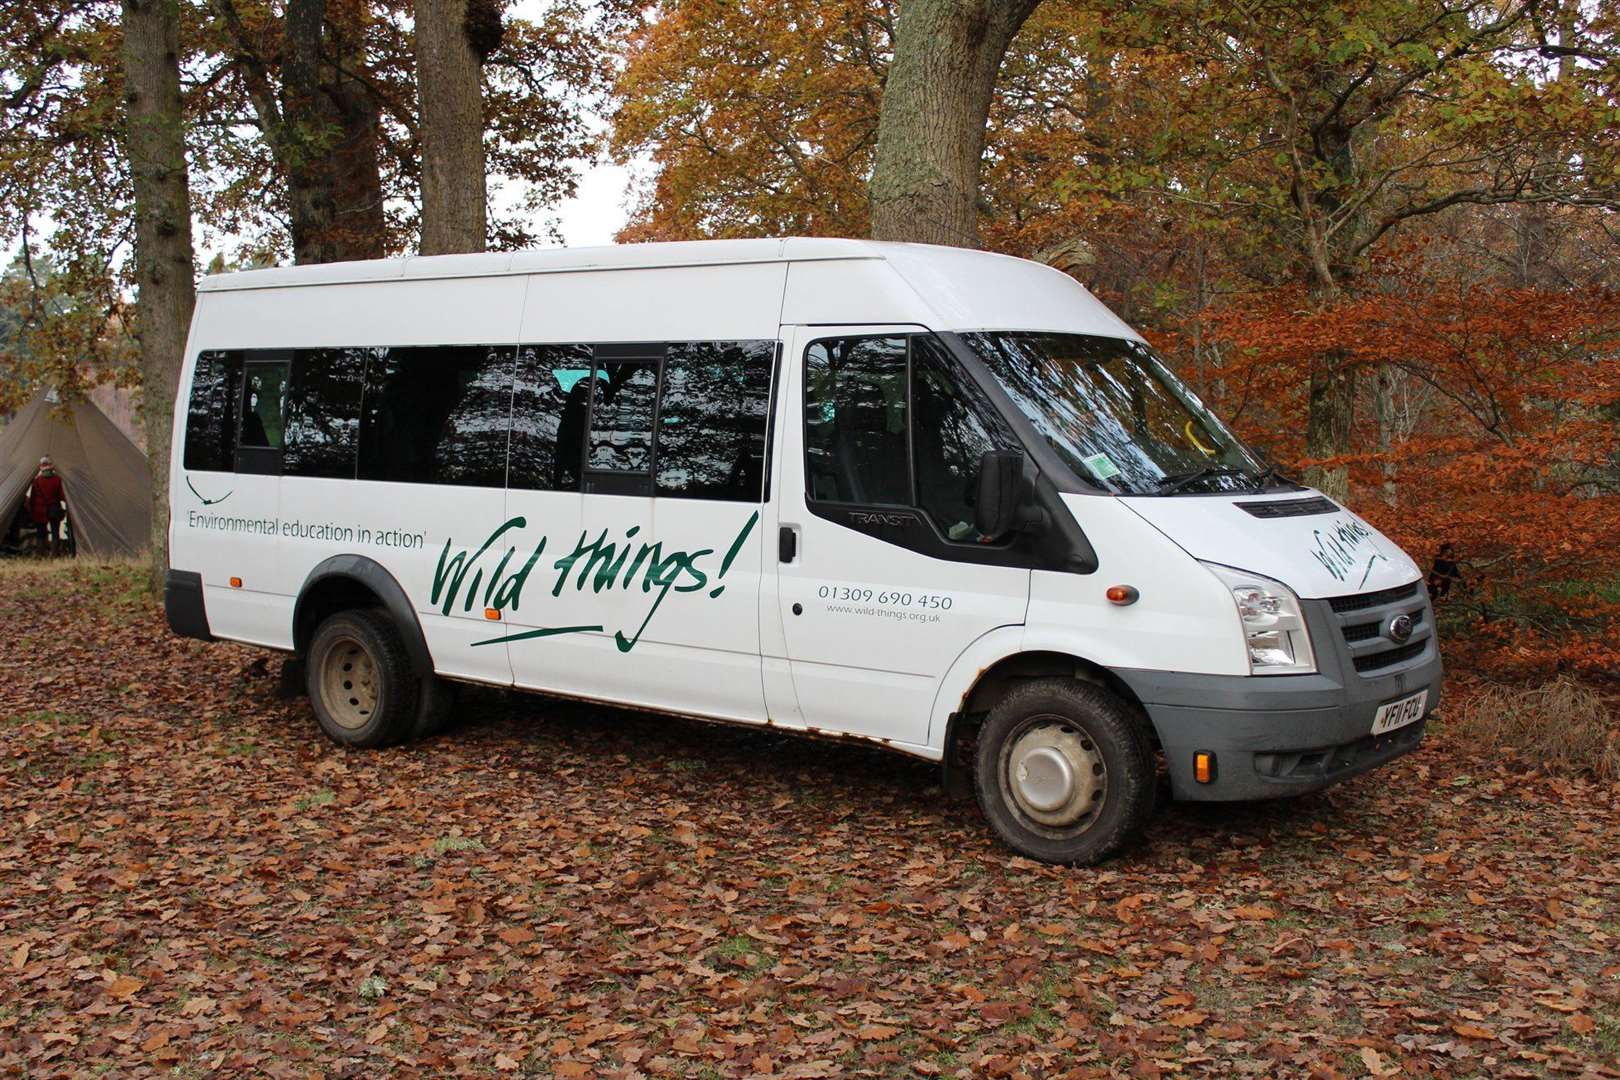 Wild Thing's want to buy a replacement minibus with additional features for passengers with mobility issues.